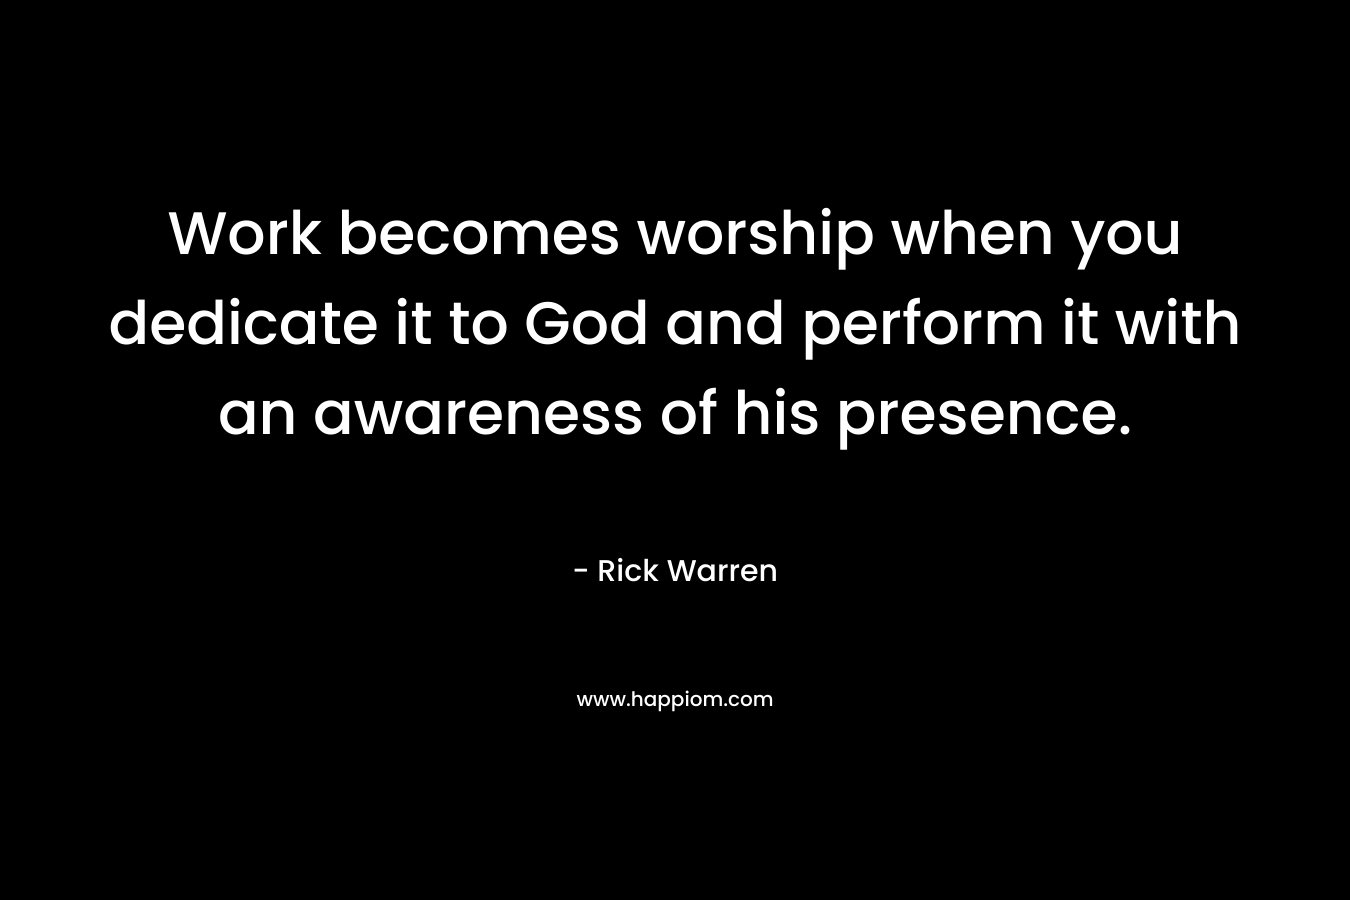 Work becomes worship when you dedicate it to God and perform it with an awareness of his presence.